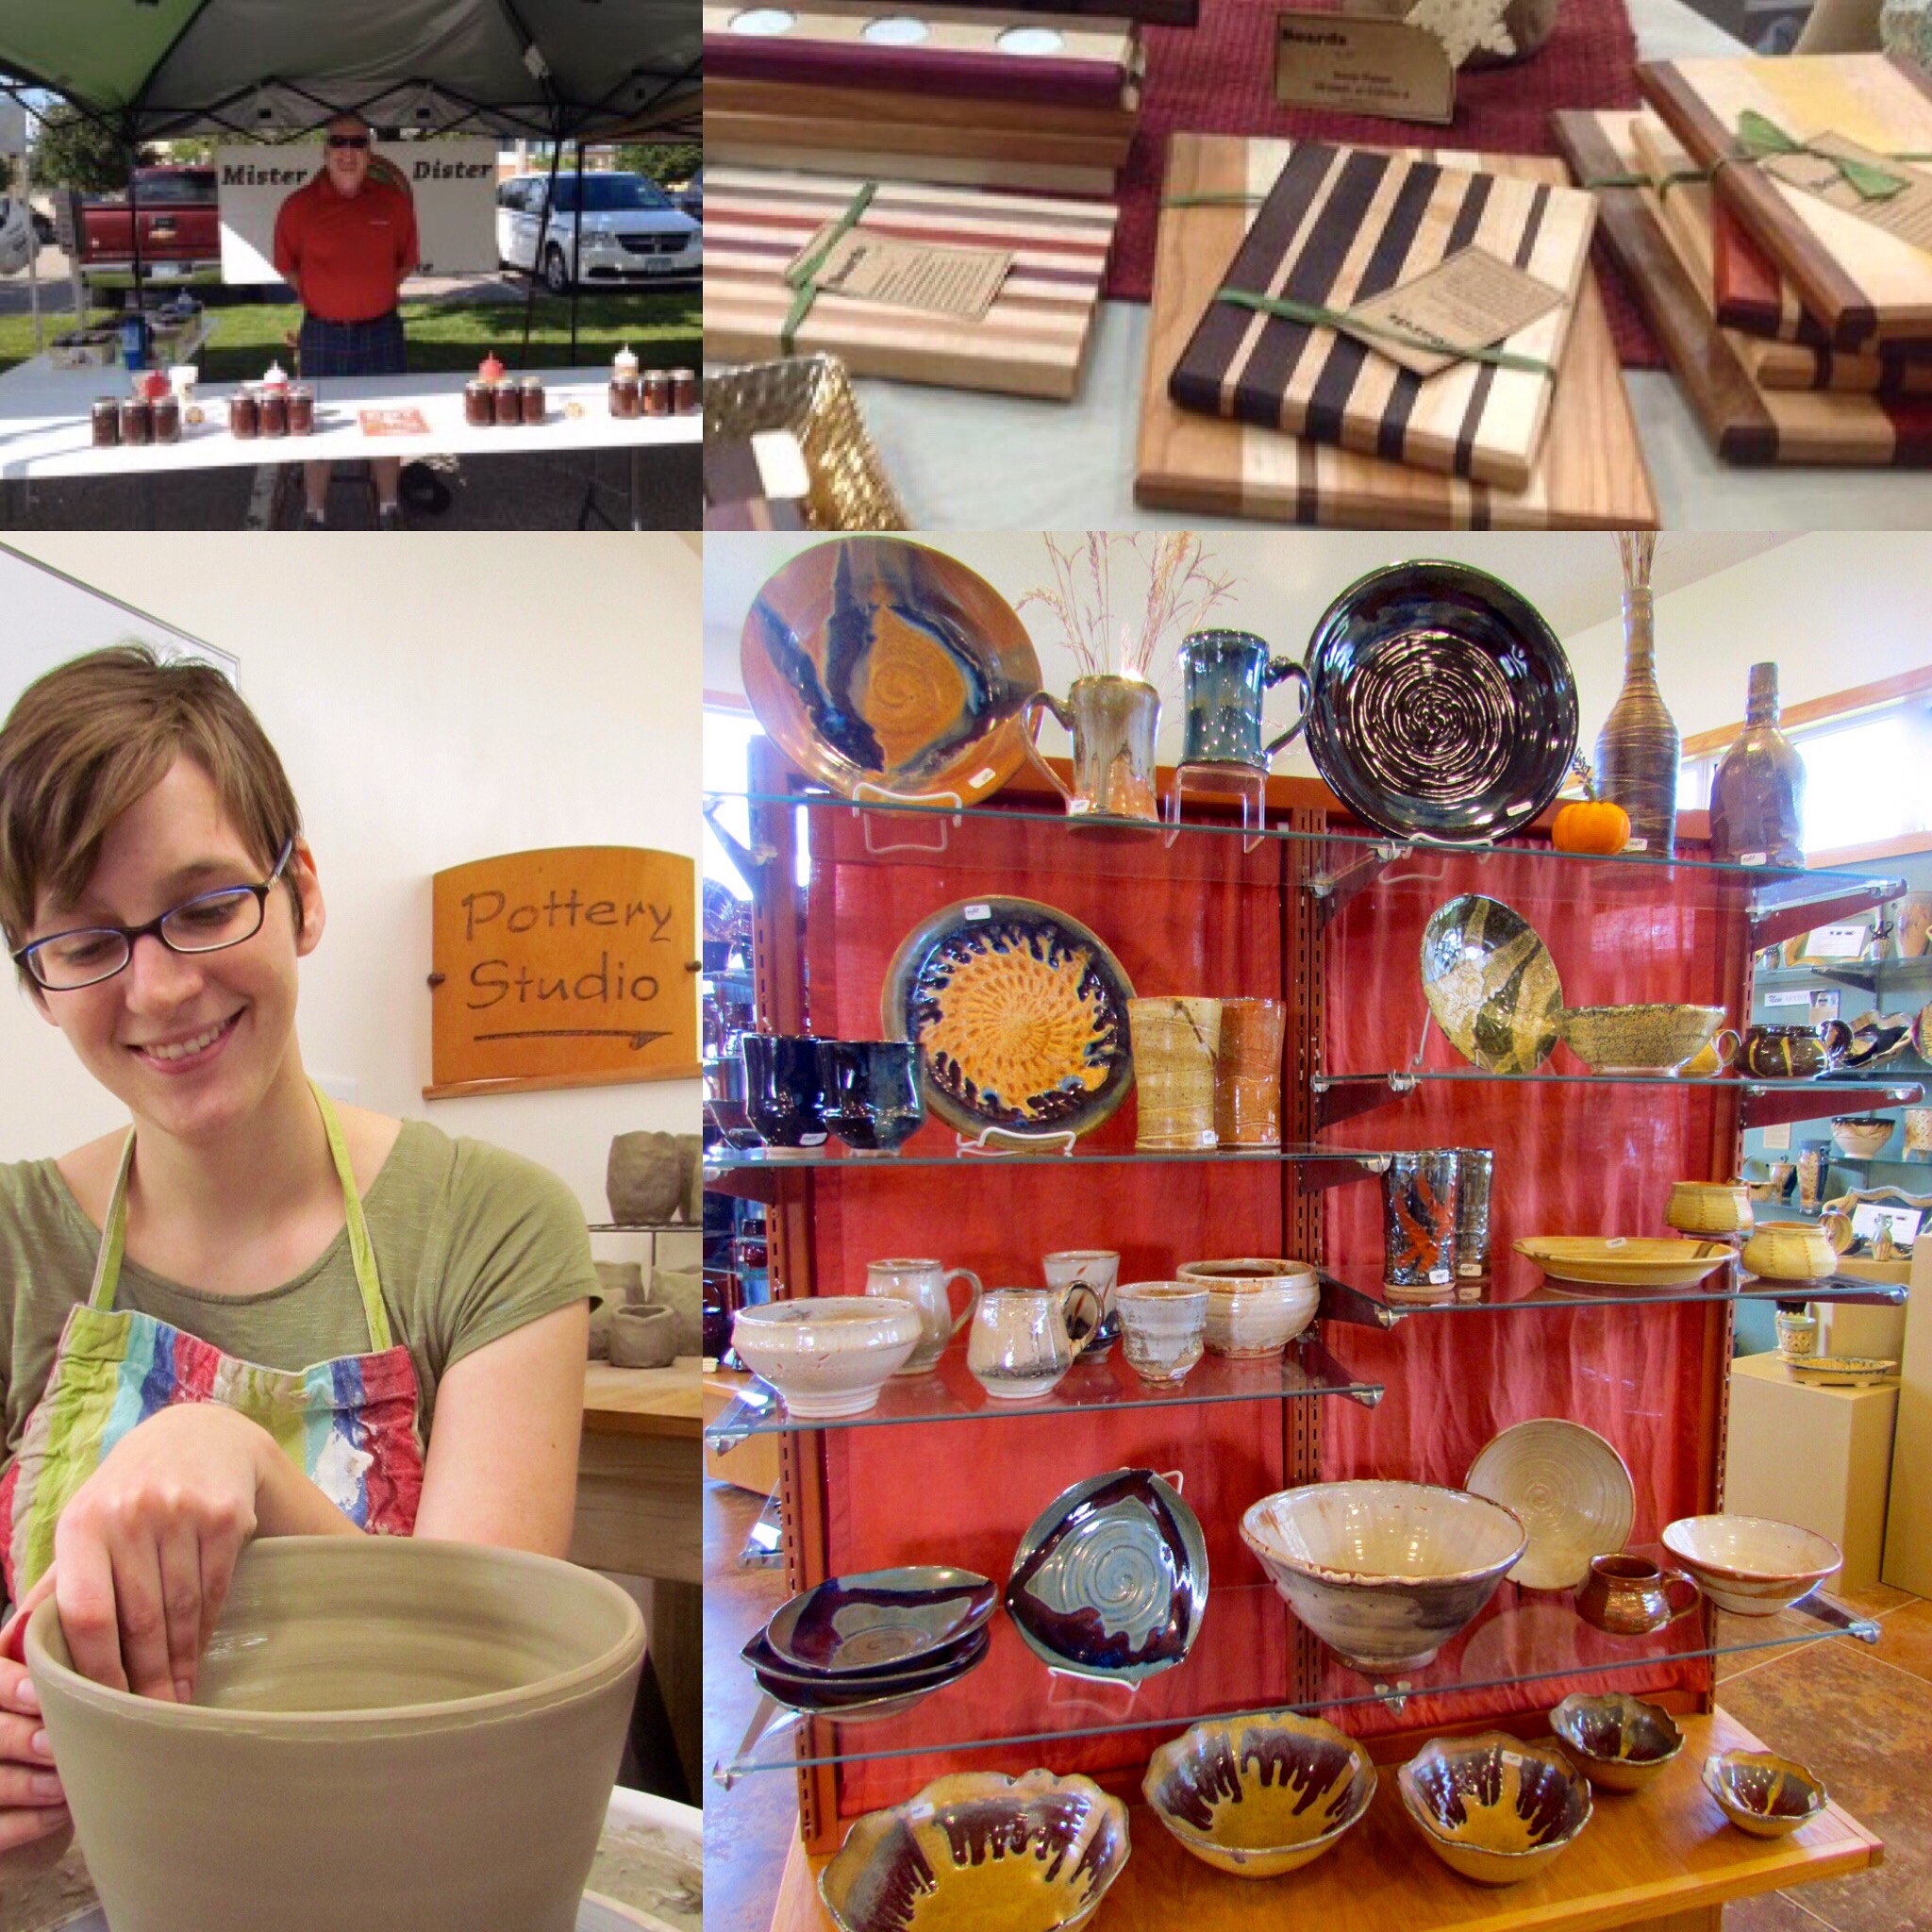 Katie Teesdale, Levi Yankosky Pottery, Boards by Deb, and Mister Dister BBQ